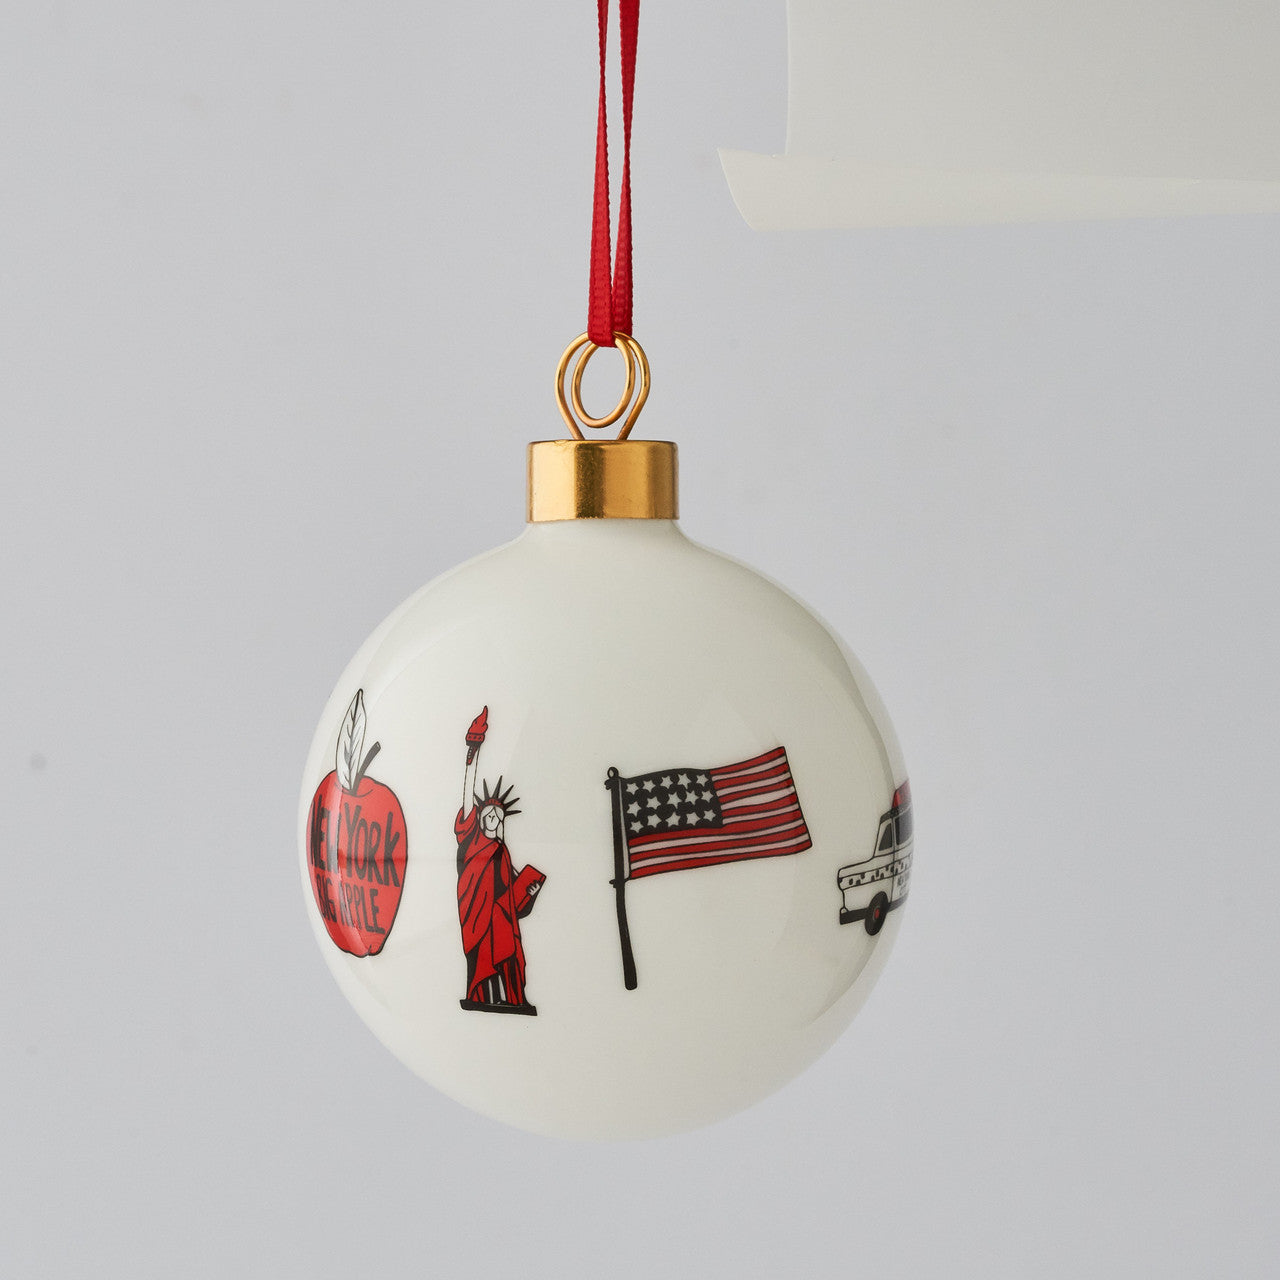 Bone china New York, New York Christmas bus bauble from Victoria Eggs.